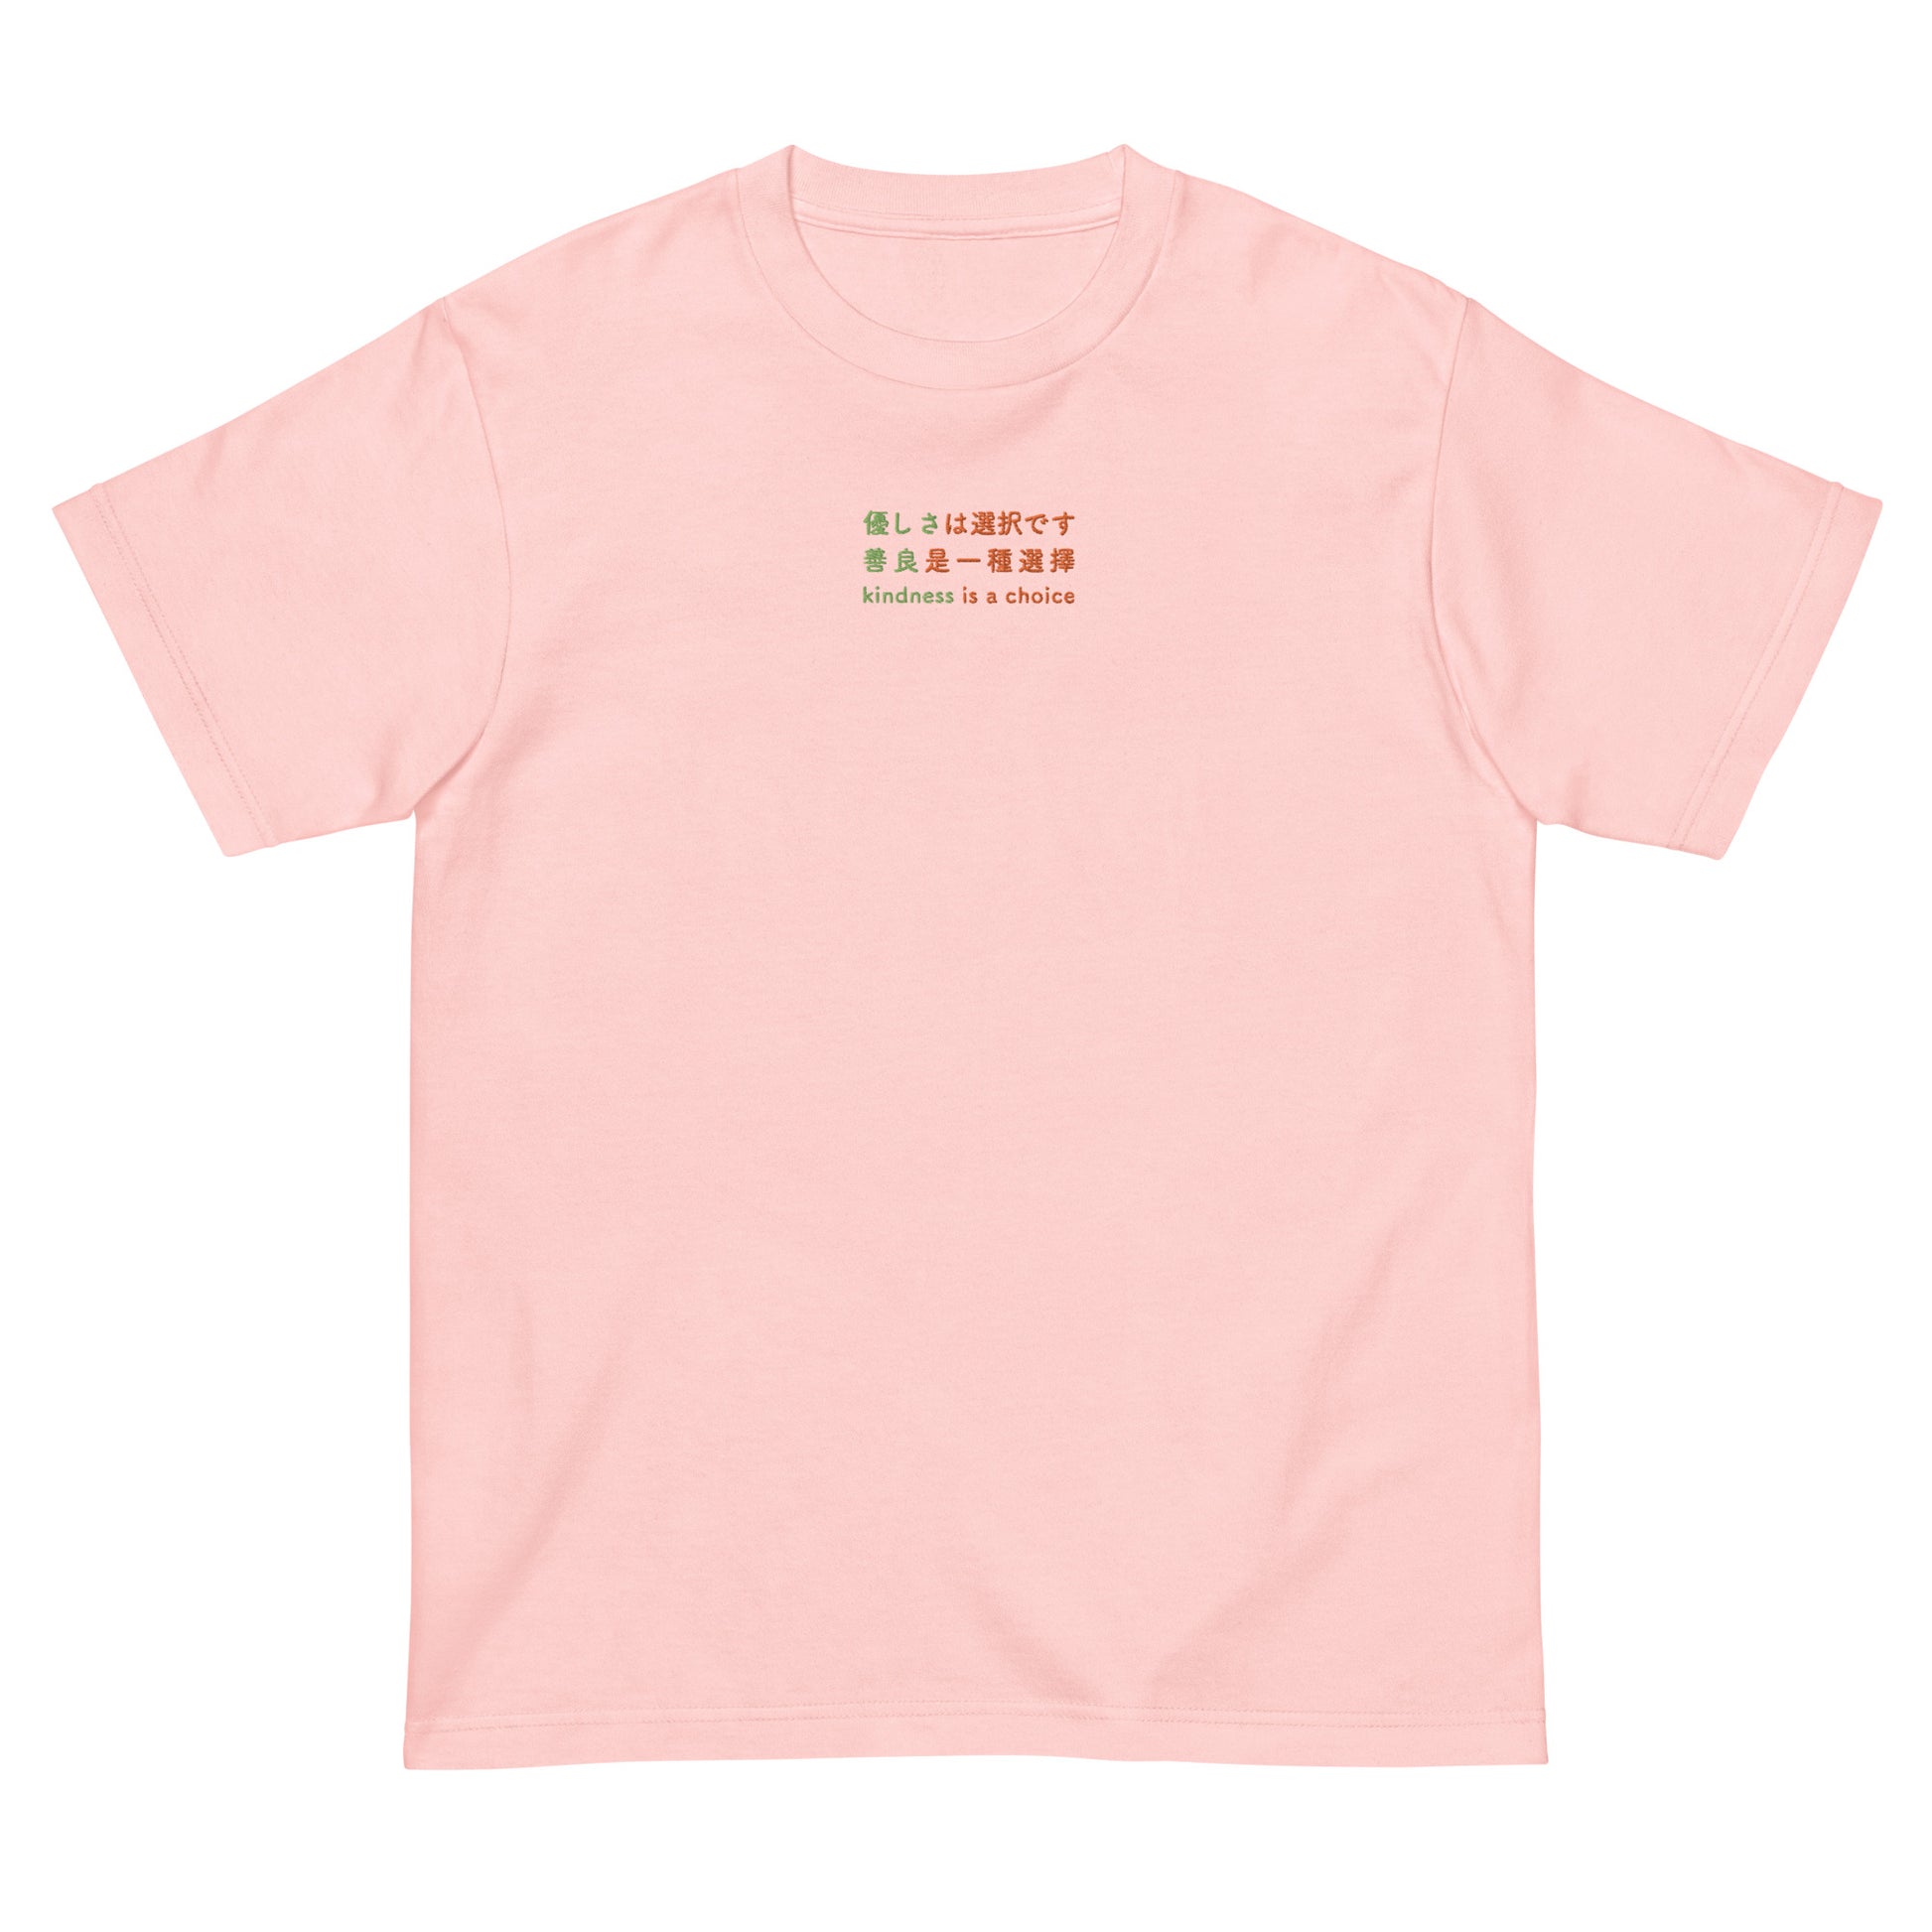 Pink High Quality Tee - Front Design with an Green, Orange Embroidery "Kindness is a Choice" in Japanese,Chinese and English